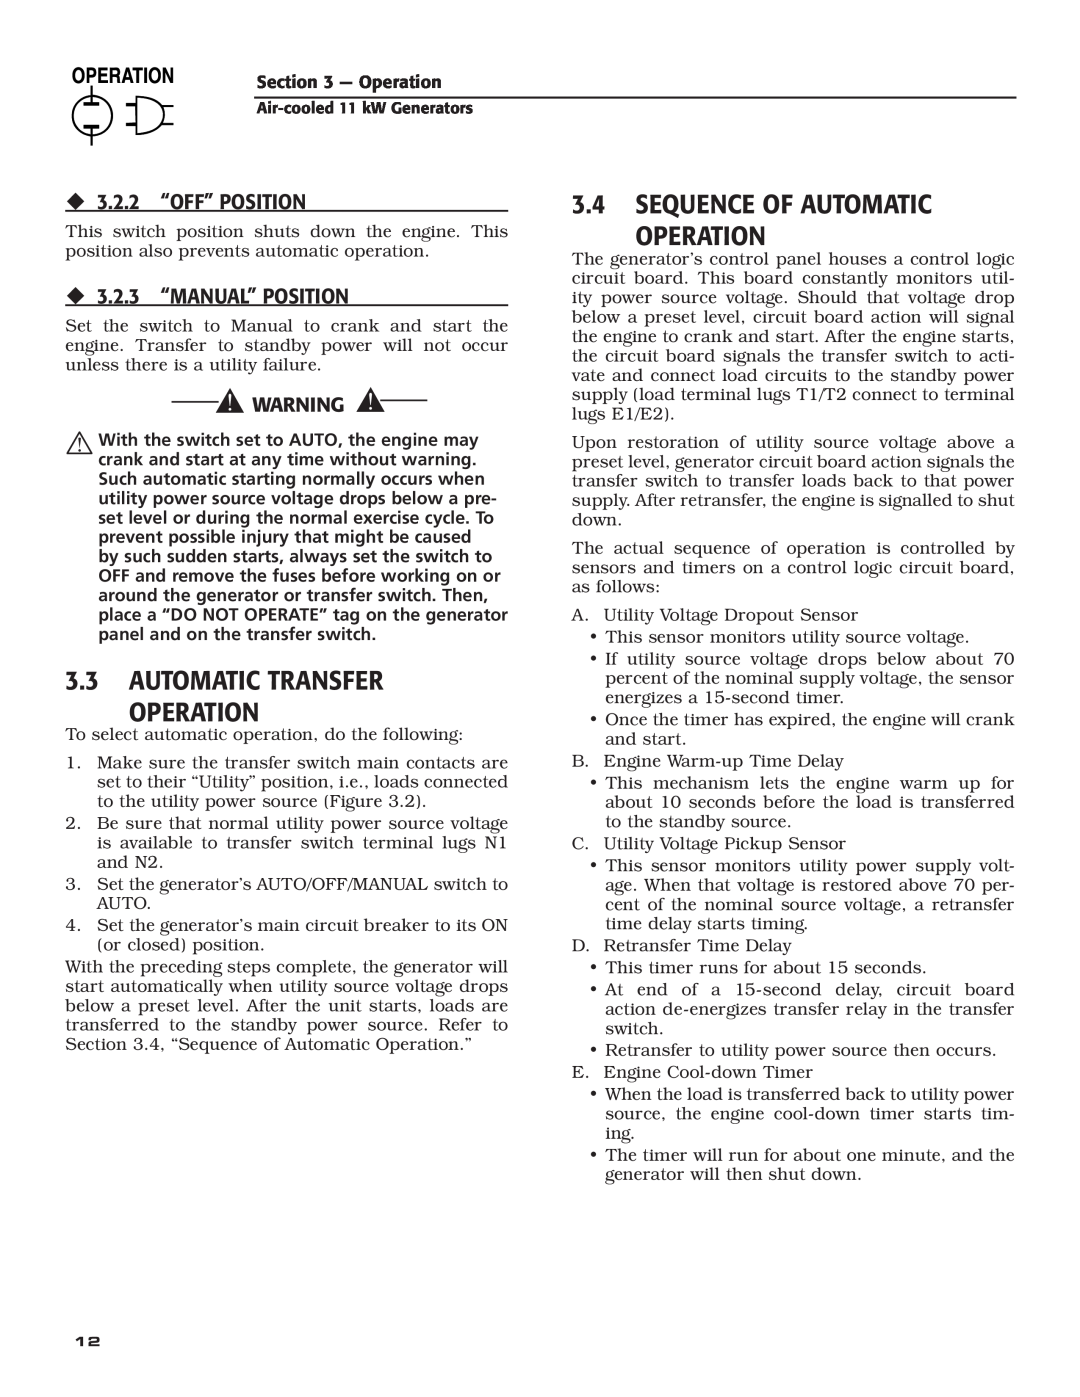 Generac Power Systems 004916-0 Automatic Transfer Operation, Sequence Of Automatic Operation, ‹ 3.2.2 “OFF” POSITION 